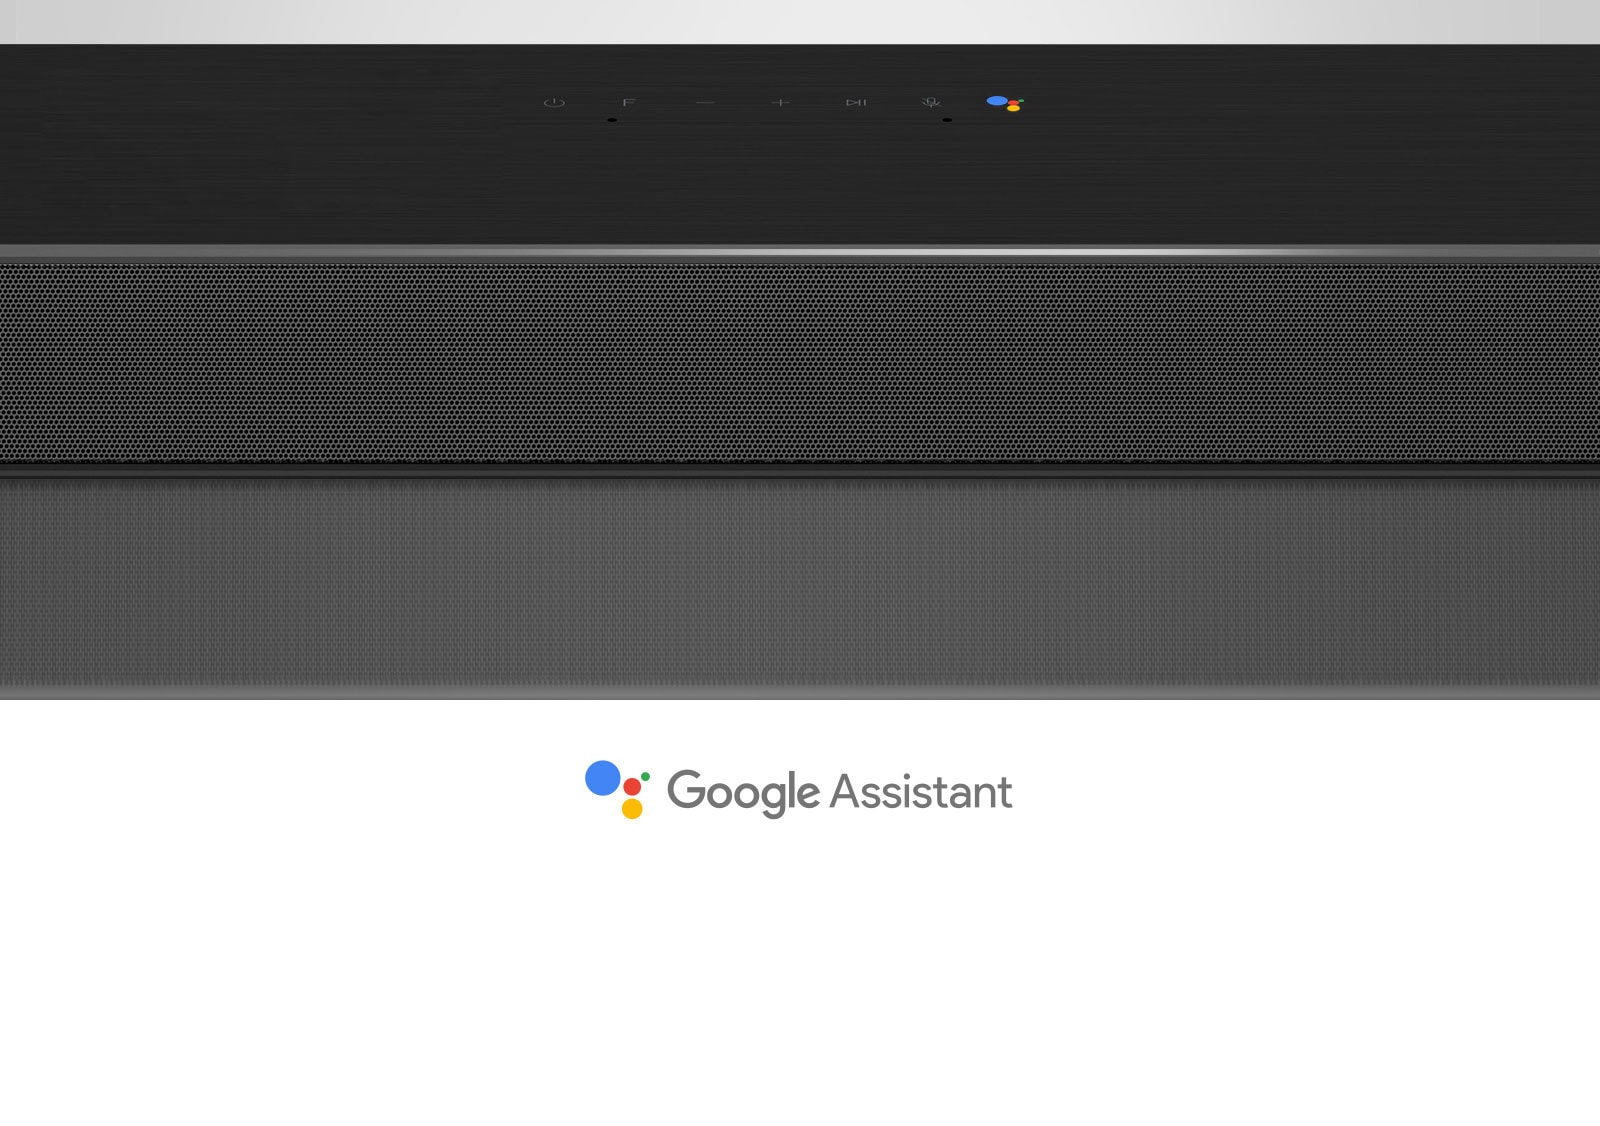 Close-up LG Soundbar mid-section with audio controls and Google Assistant logo. With Google voice command to turn up volume.